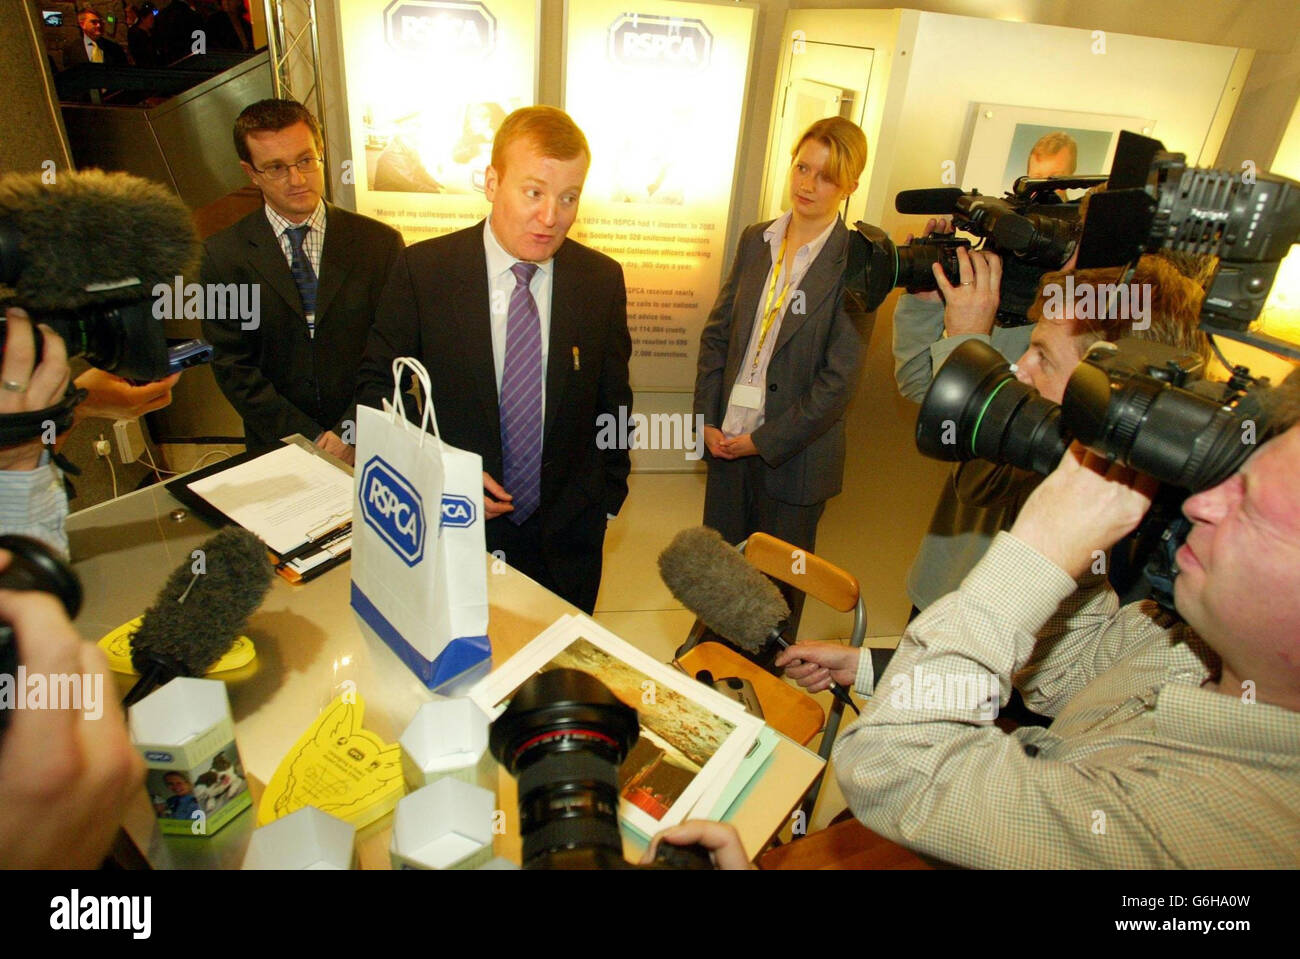 Liberal Democrat leader Charles Kennedy talks to the press on a tour round the exhibition hall, during his party s conference in Brighton. The middle classes should be prepared to pay a little more to create a decent society, Kennedy said today. He conceded that about a third of households would end up paying more tax under his party's proposals to introduce a local income tax. But he said replacing the council tax would benefit those who needed it most, such as the elderly. Stock Photo